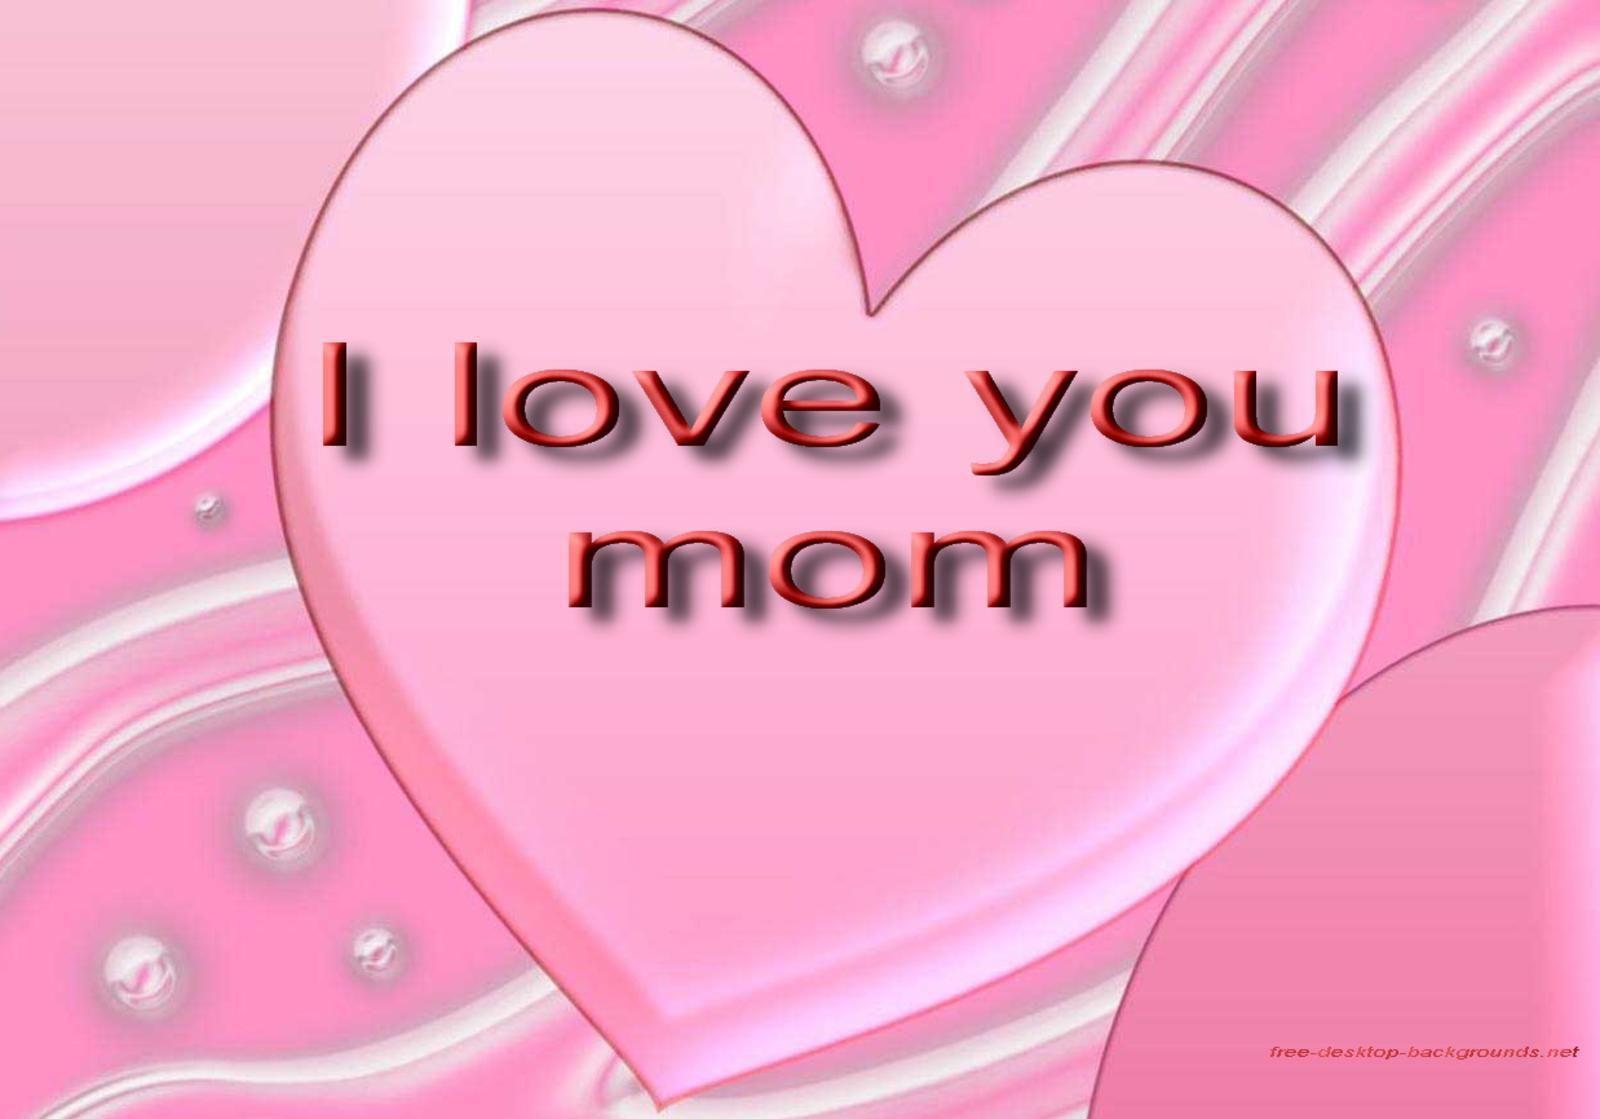 Cool Christian Wallpaper: I Love You Mom Mothers Day Wallpaper